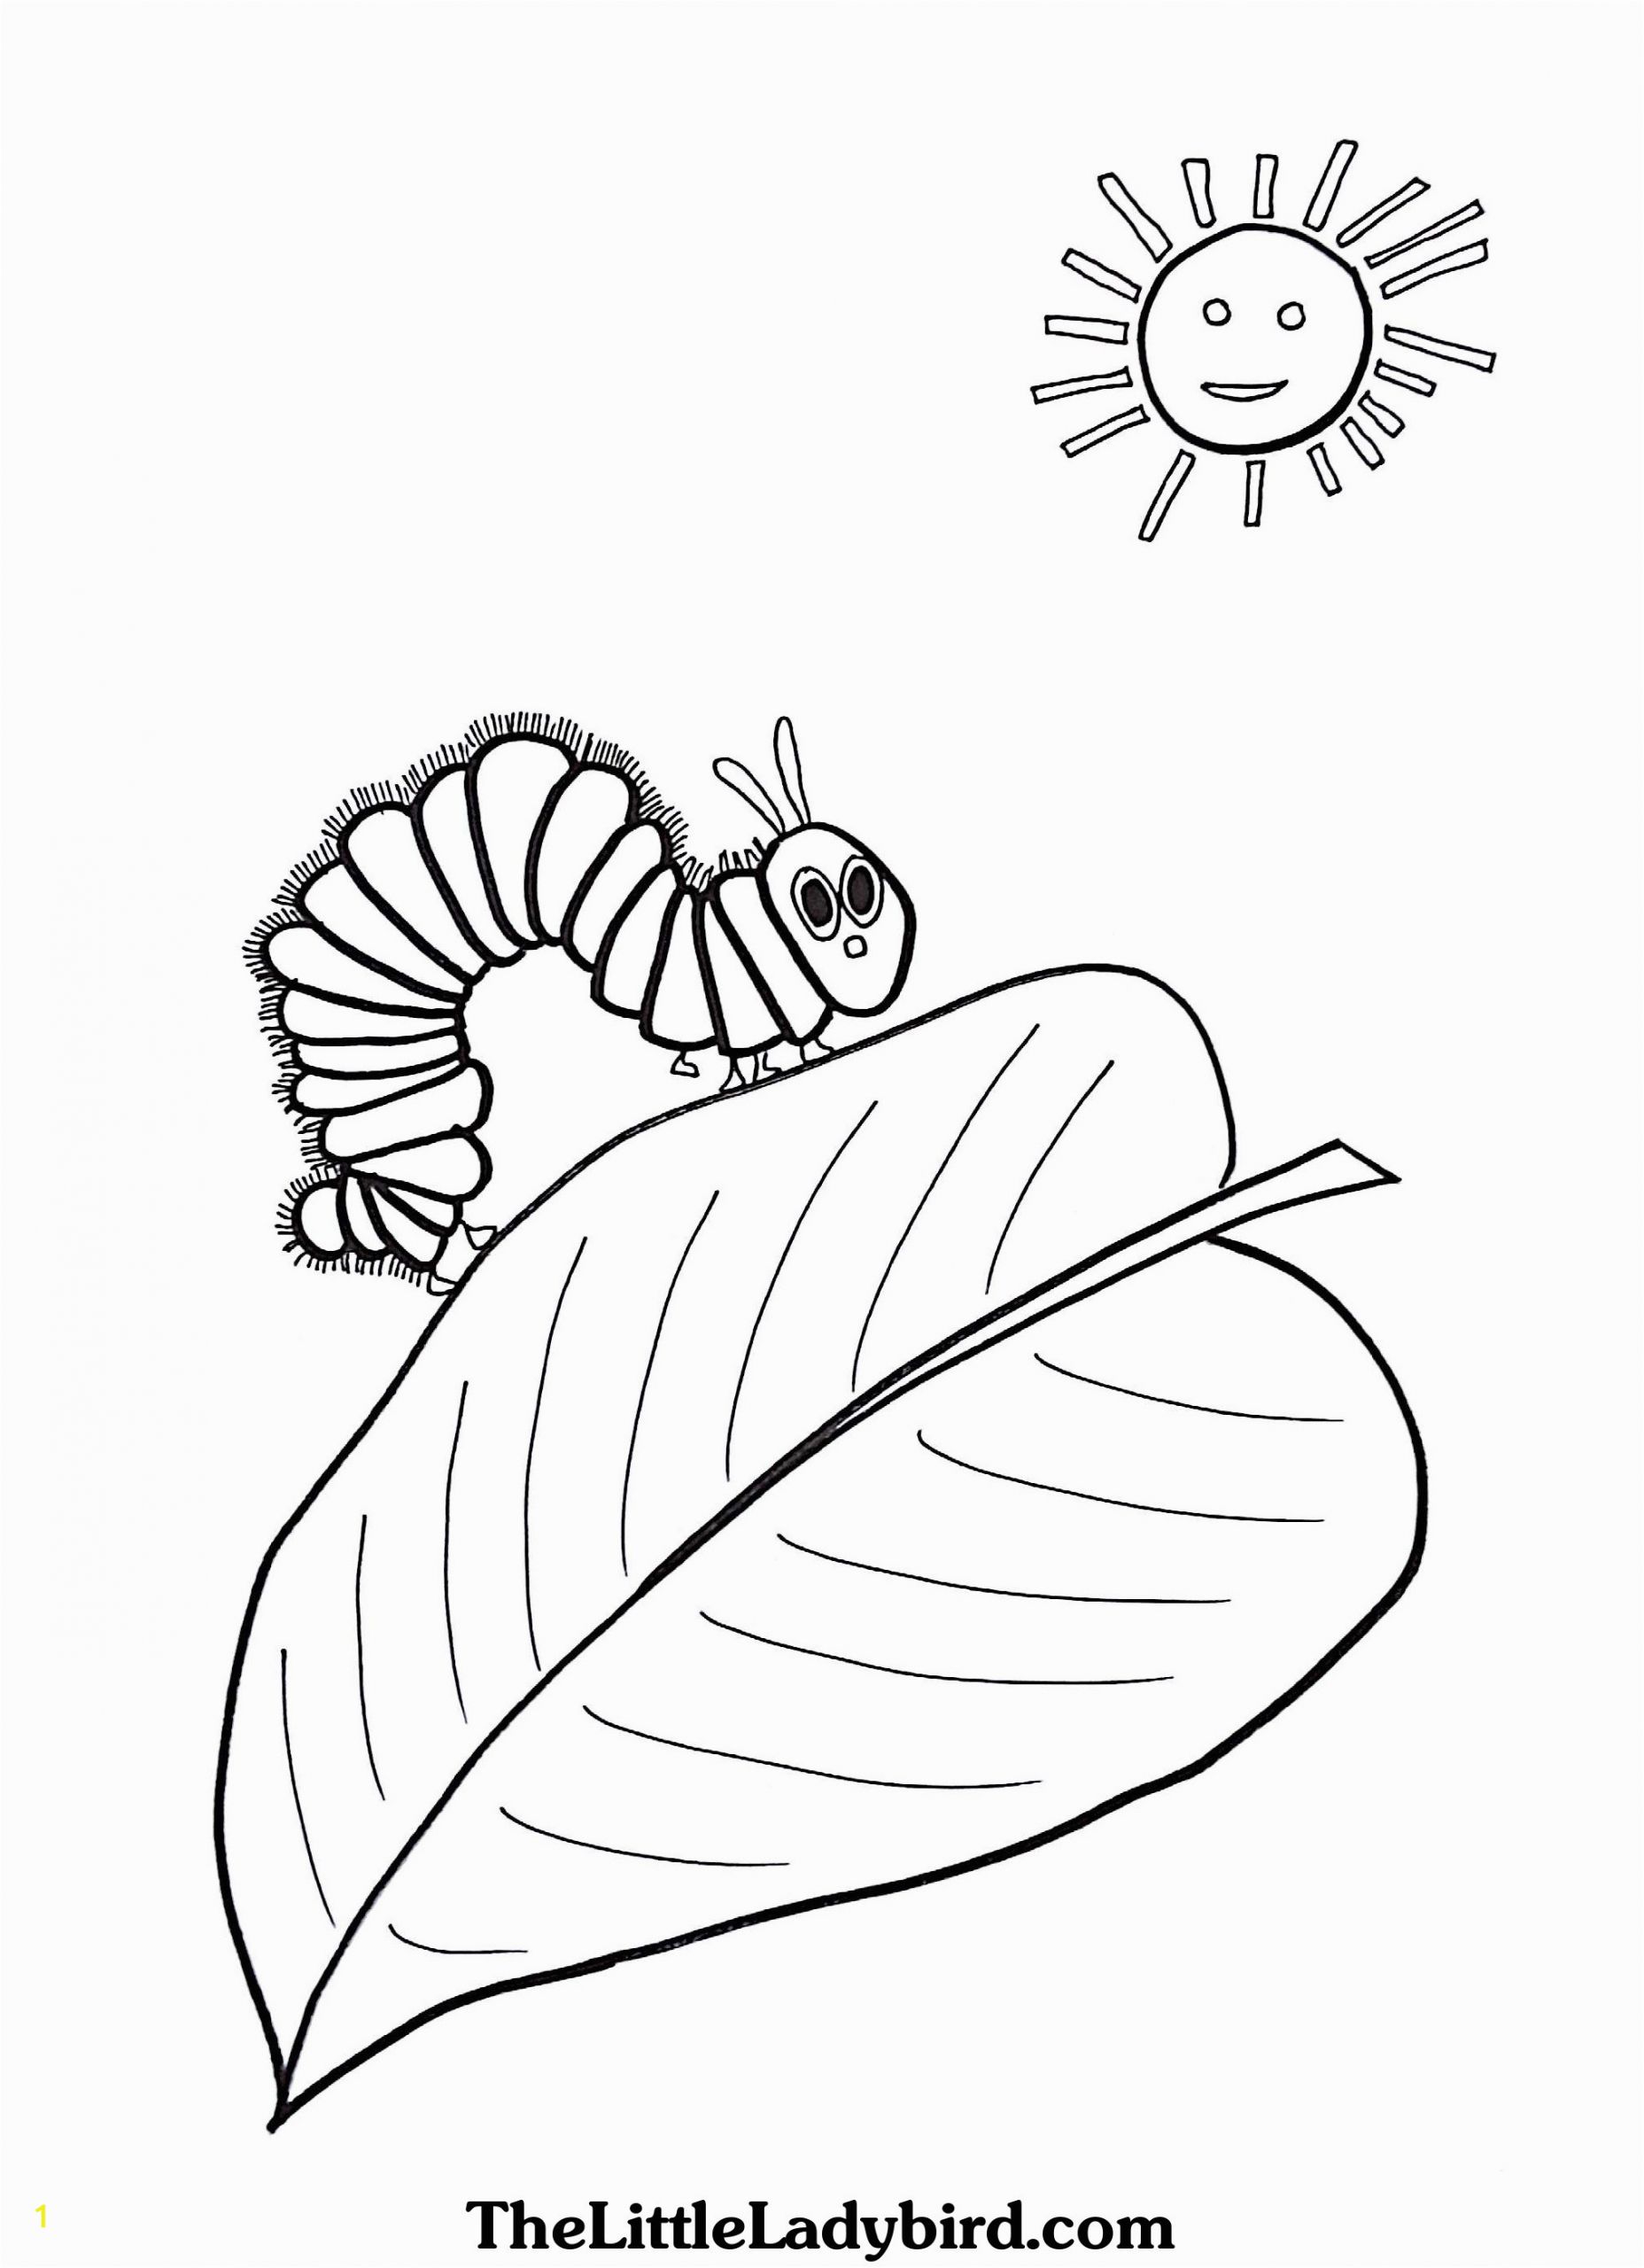 The Very Hungry Caterpillar Coloring Page 25 Awesome Picture Of Hungry Caterpillar Coloring Pages